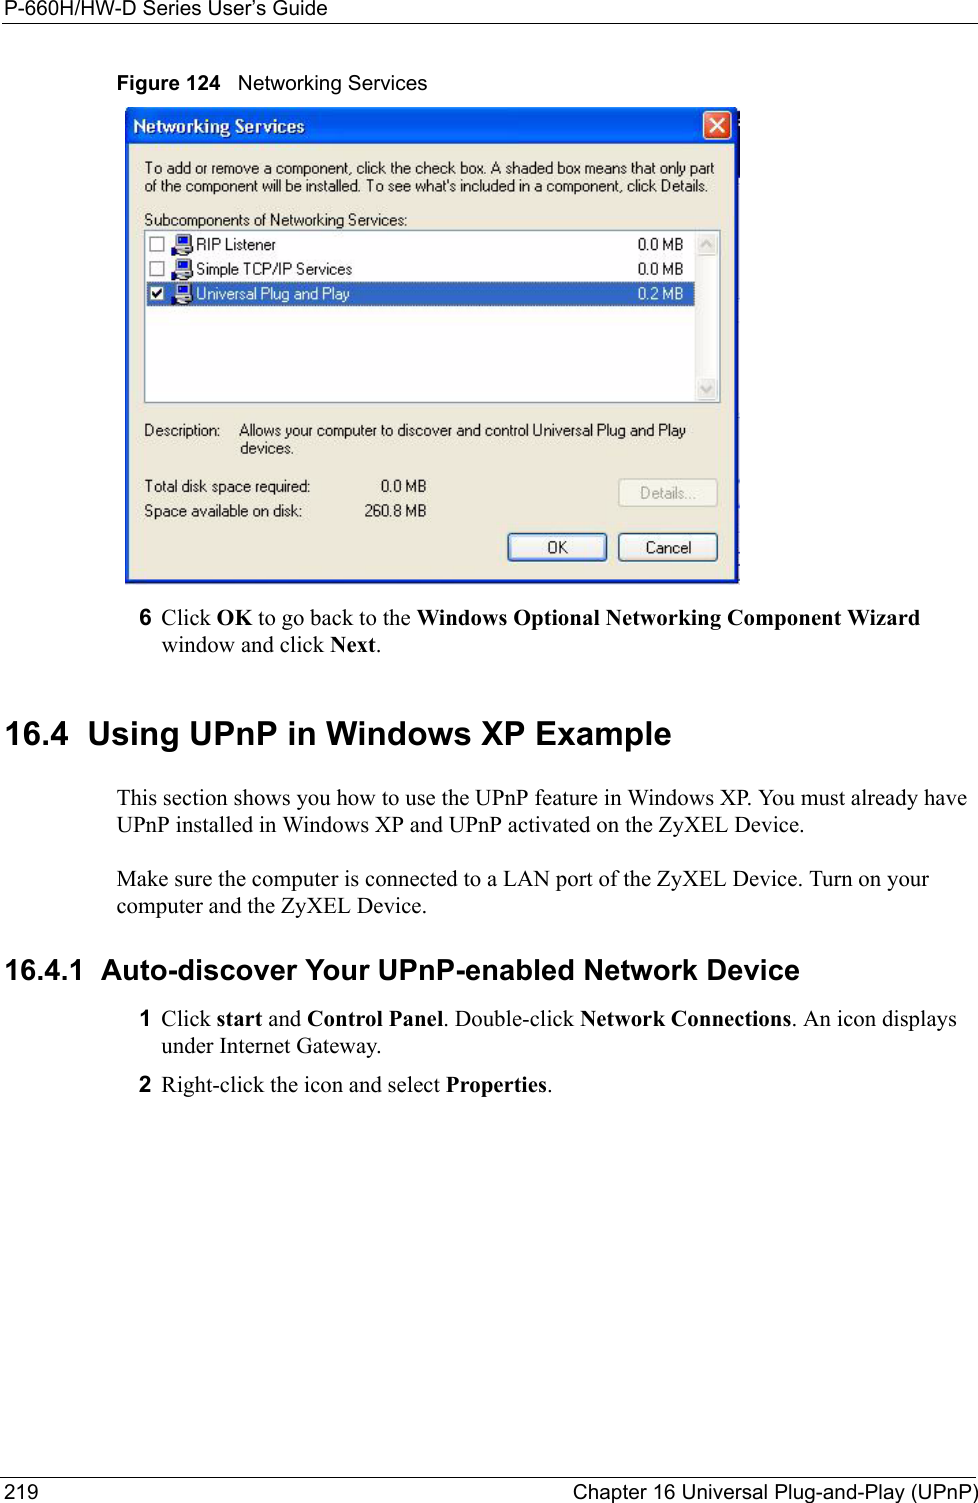 P-660H/HW-D Series User’s Guide219 Chapter 16 Universal Plug-and-Play (UPnP)Figure 124   Networking Services6Click OK to go back to the Windows Optional Networking Component Wizard window and click Next. 16.4  Using UPnP in Windows XP ExampleThis section shows you how to use the UPnP feature in Windows XP. You must already have UPnP installed in Windows XP and UPnP activated on the ZyXEL Device.Make sure the computer is connected to a LAN port of the ZyXEL Device. Turn on your computer and the ZyXEL Device. 16.4.1  Auto-discover Your UPnP-enabled Network Device1Click start and Control Panel. Double-click Network Connections. An icon displays under Internet Gateway.2Right-click the icon and select Properties. 